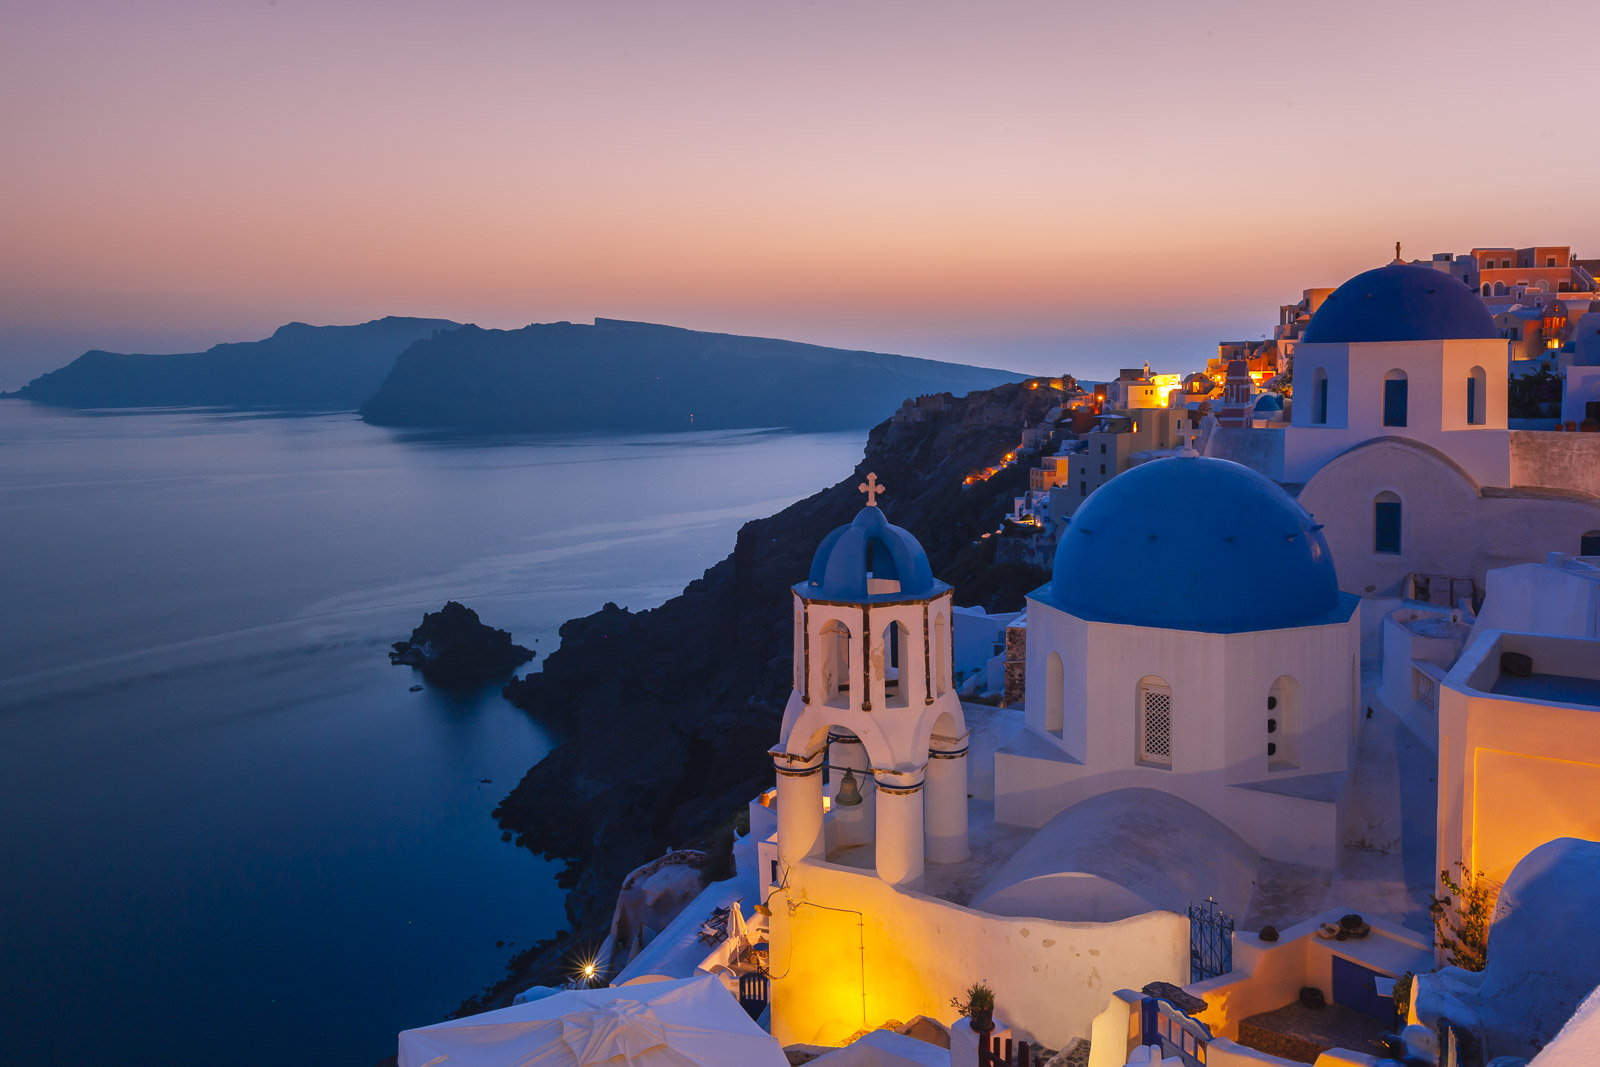 Best place to stay in Santorini for nightlife is Fira